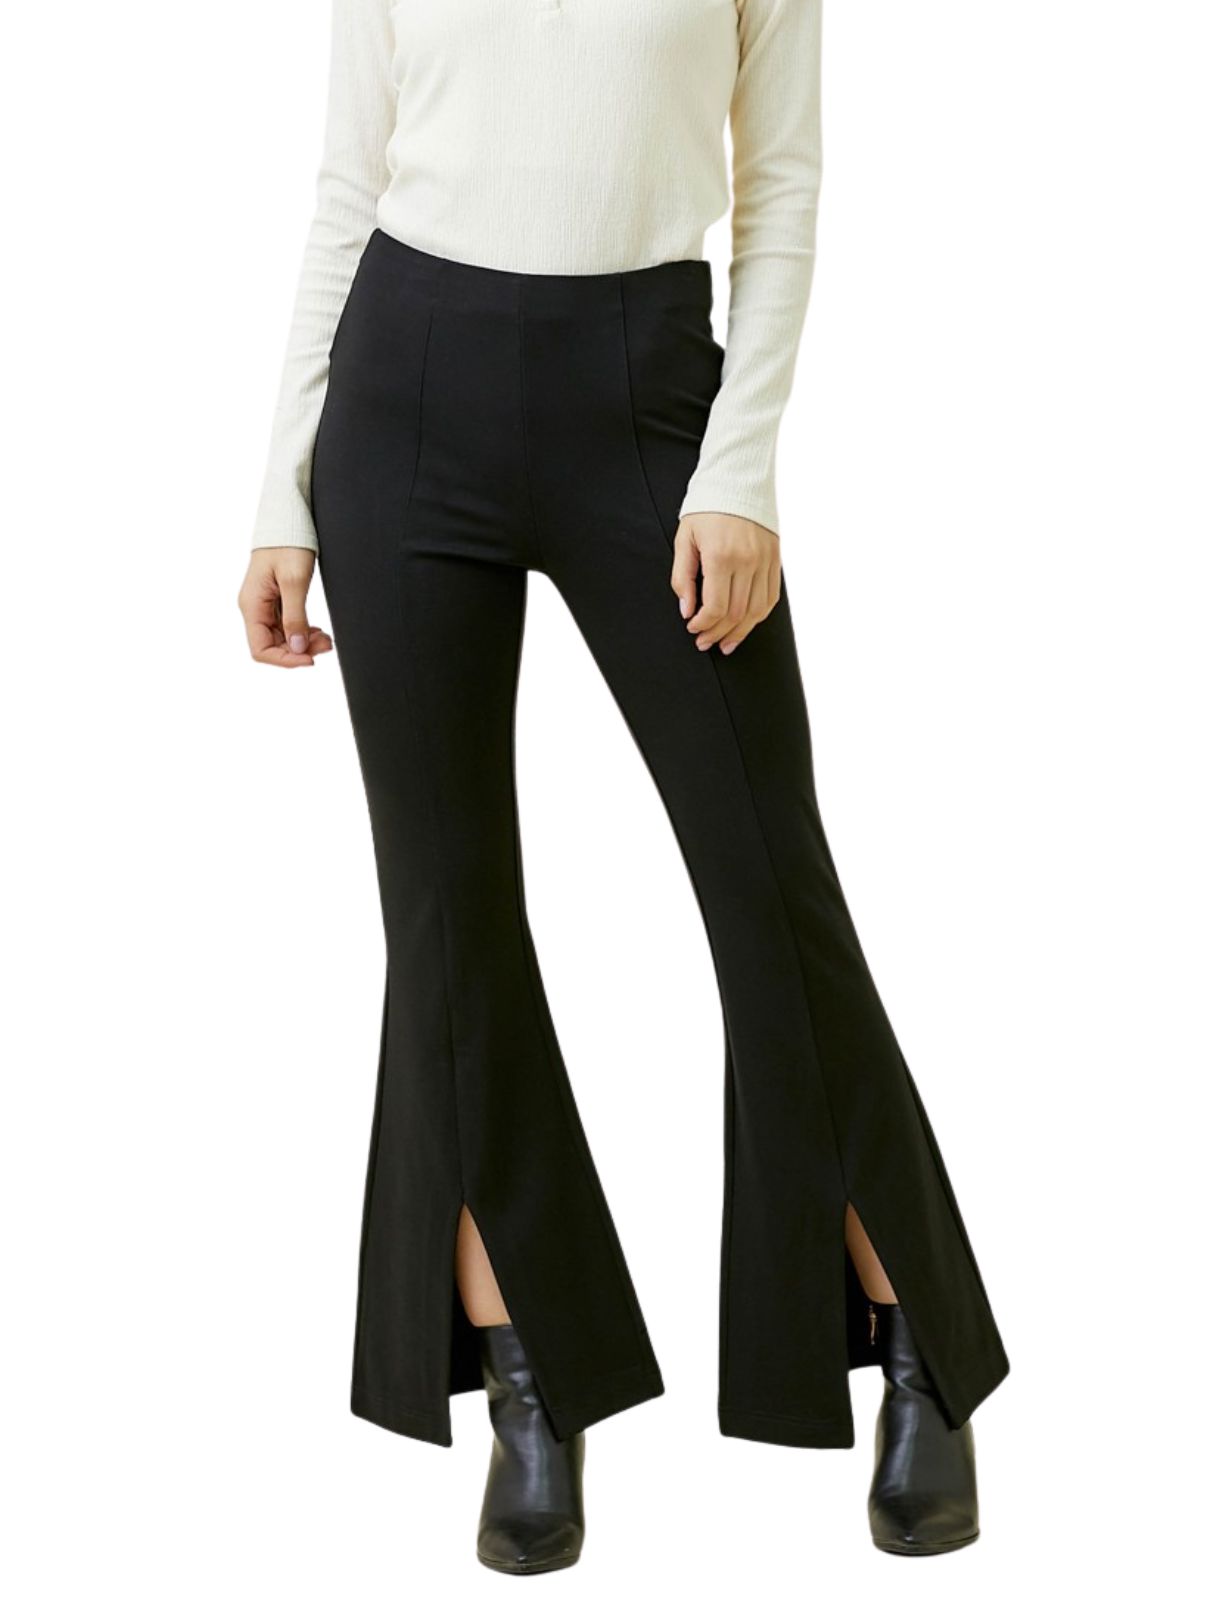 Flare Front Slit Pant in Black  Cotton Island Women's Clothing Boutique